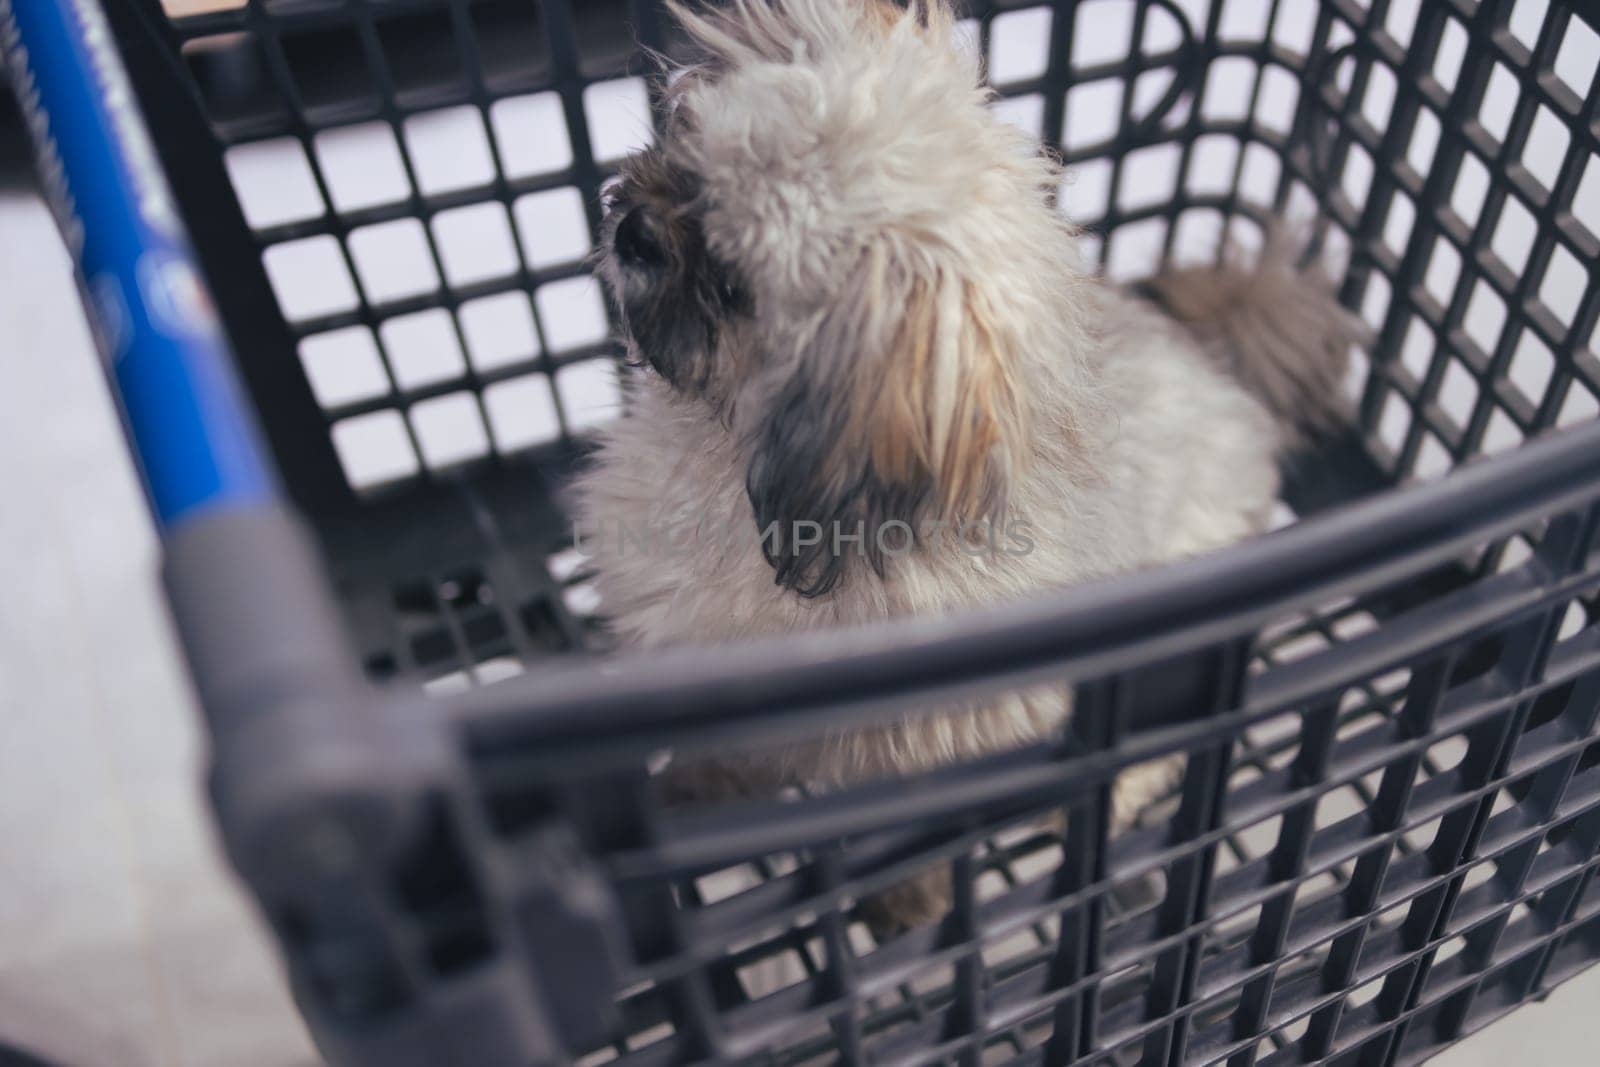 A cute little puppy of light color sits in a gray shopping basket by PopOff